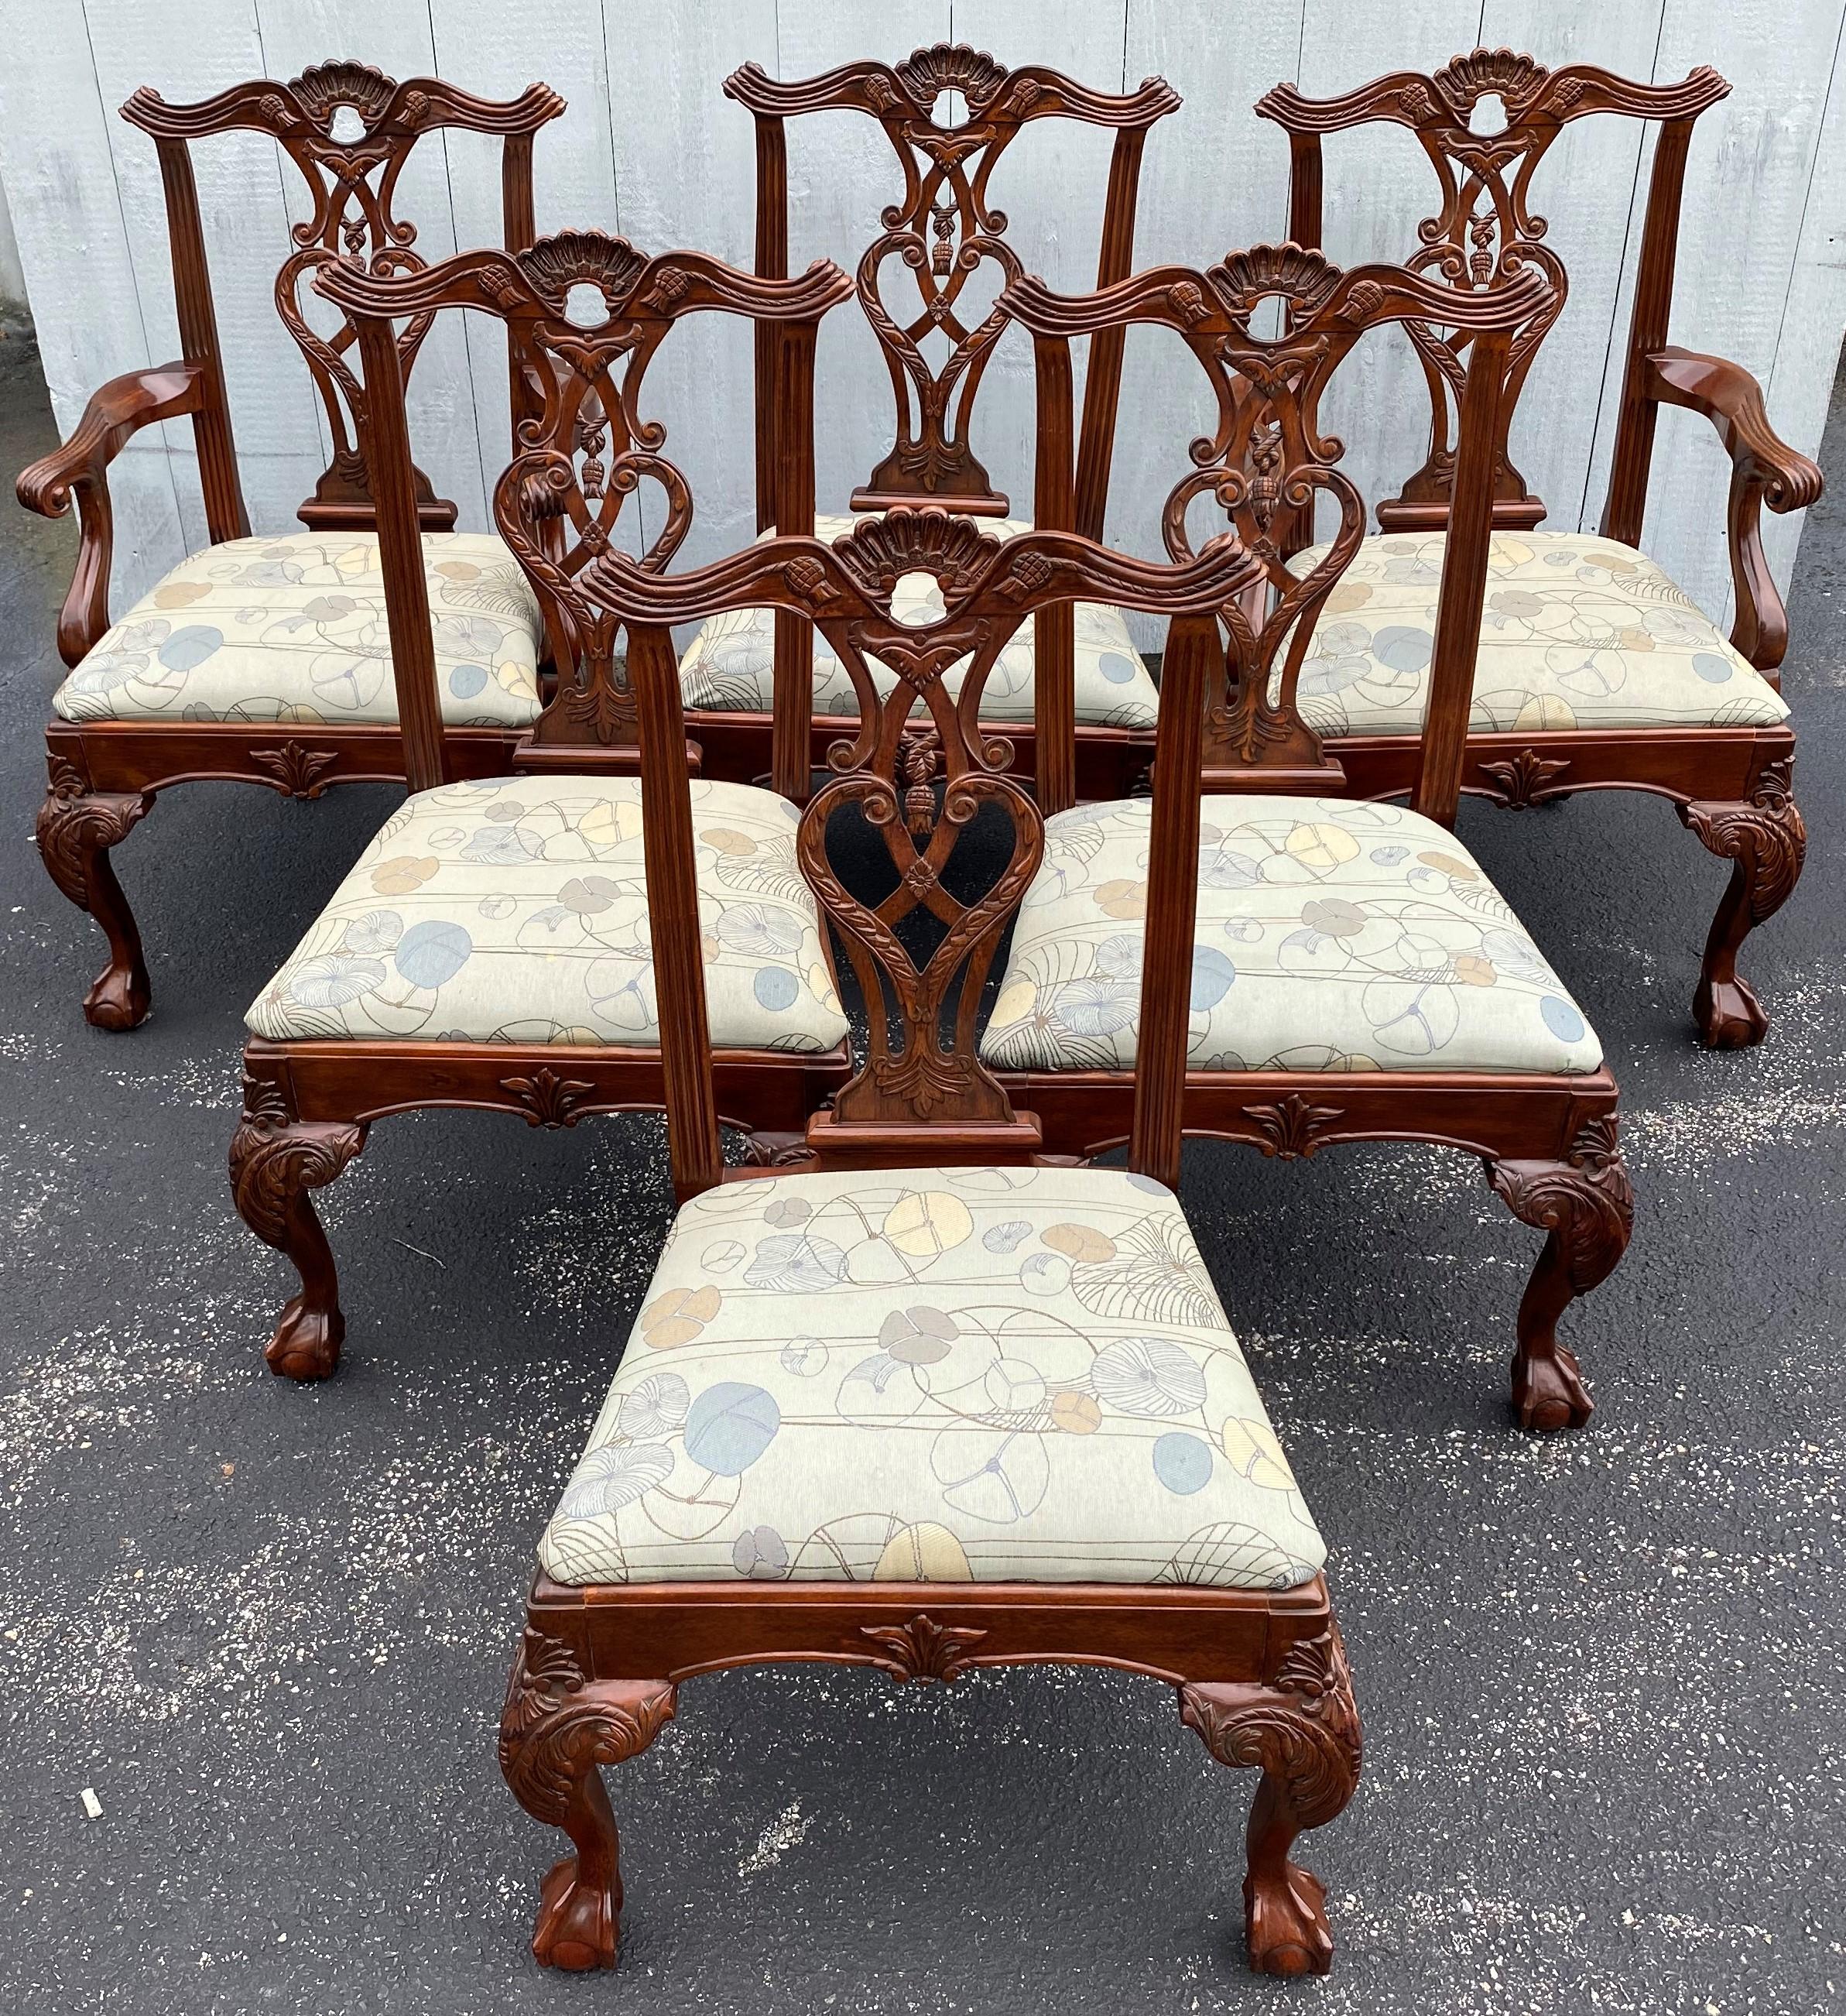 A fine set of six Chippendale style solid mahogany dining chairs including two arm chairs and four side chairs, each with nicely pierce carved shell crests and splats, scroll & foliate carved skirts & front cabriole legs, terminating with ball and